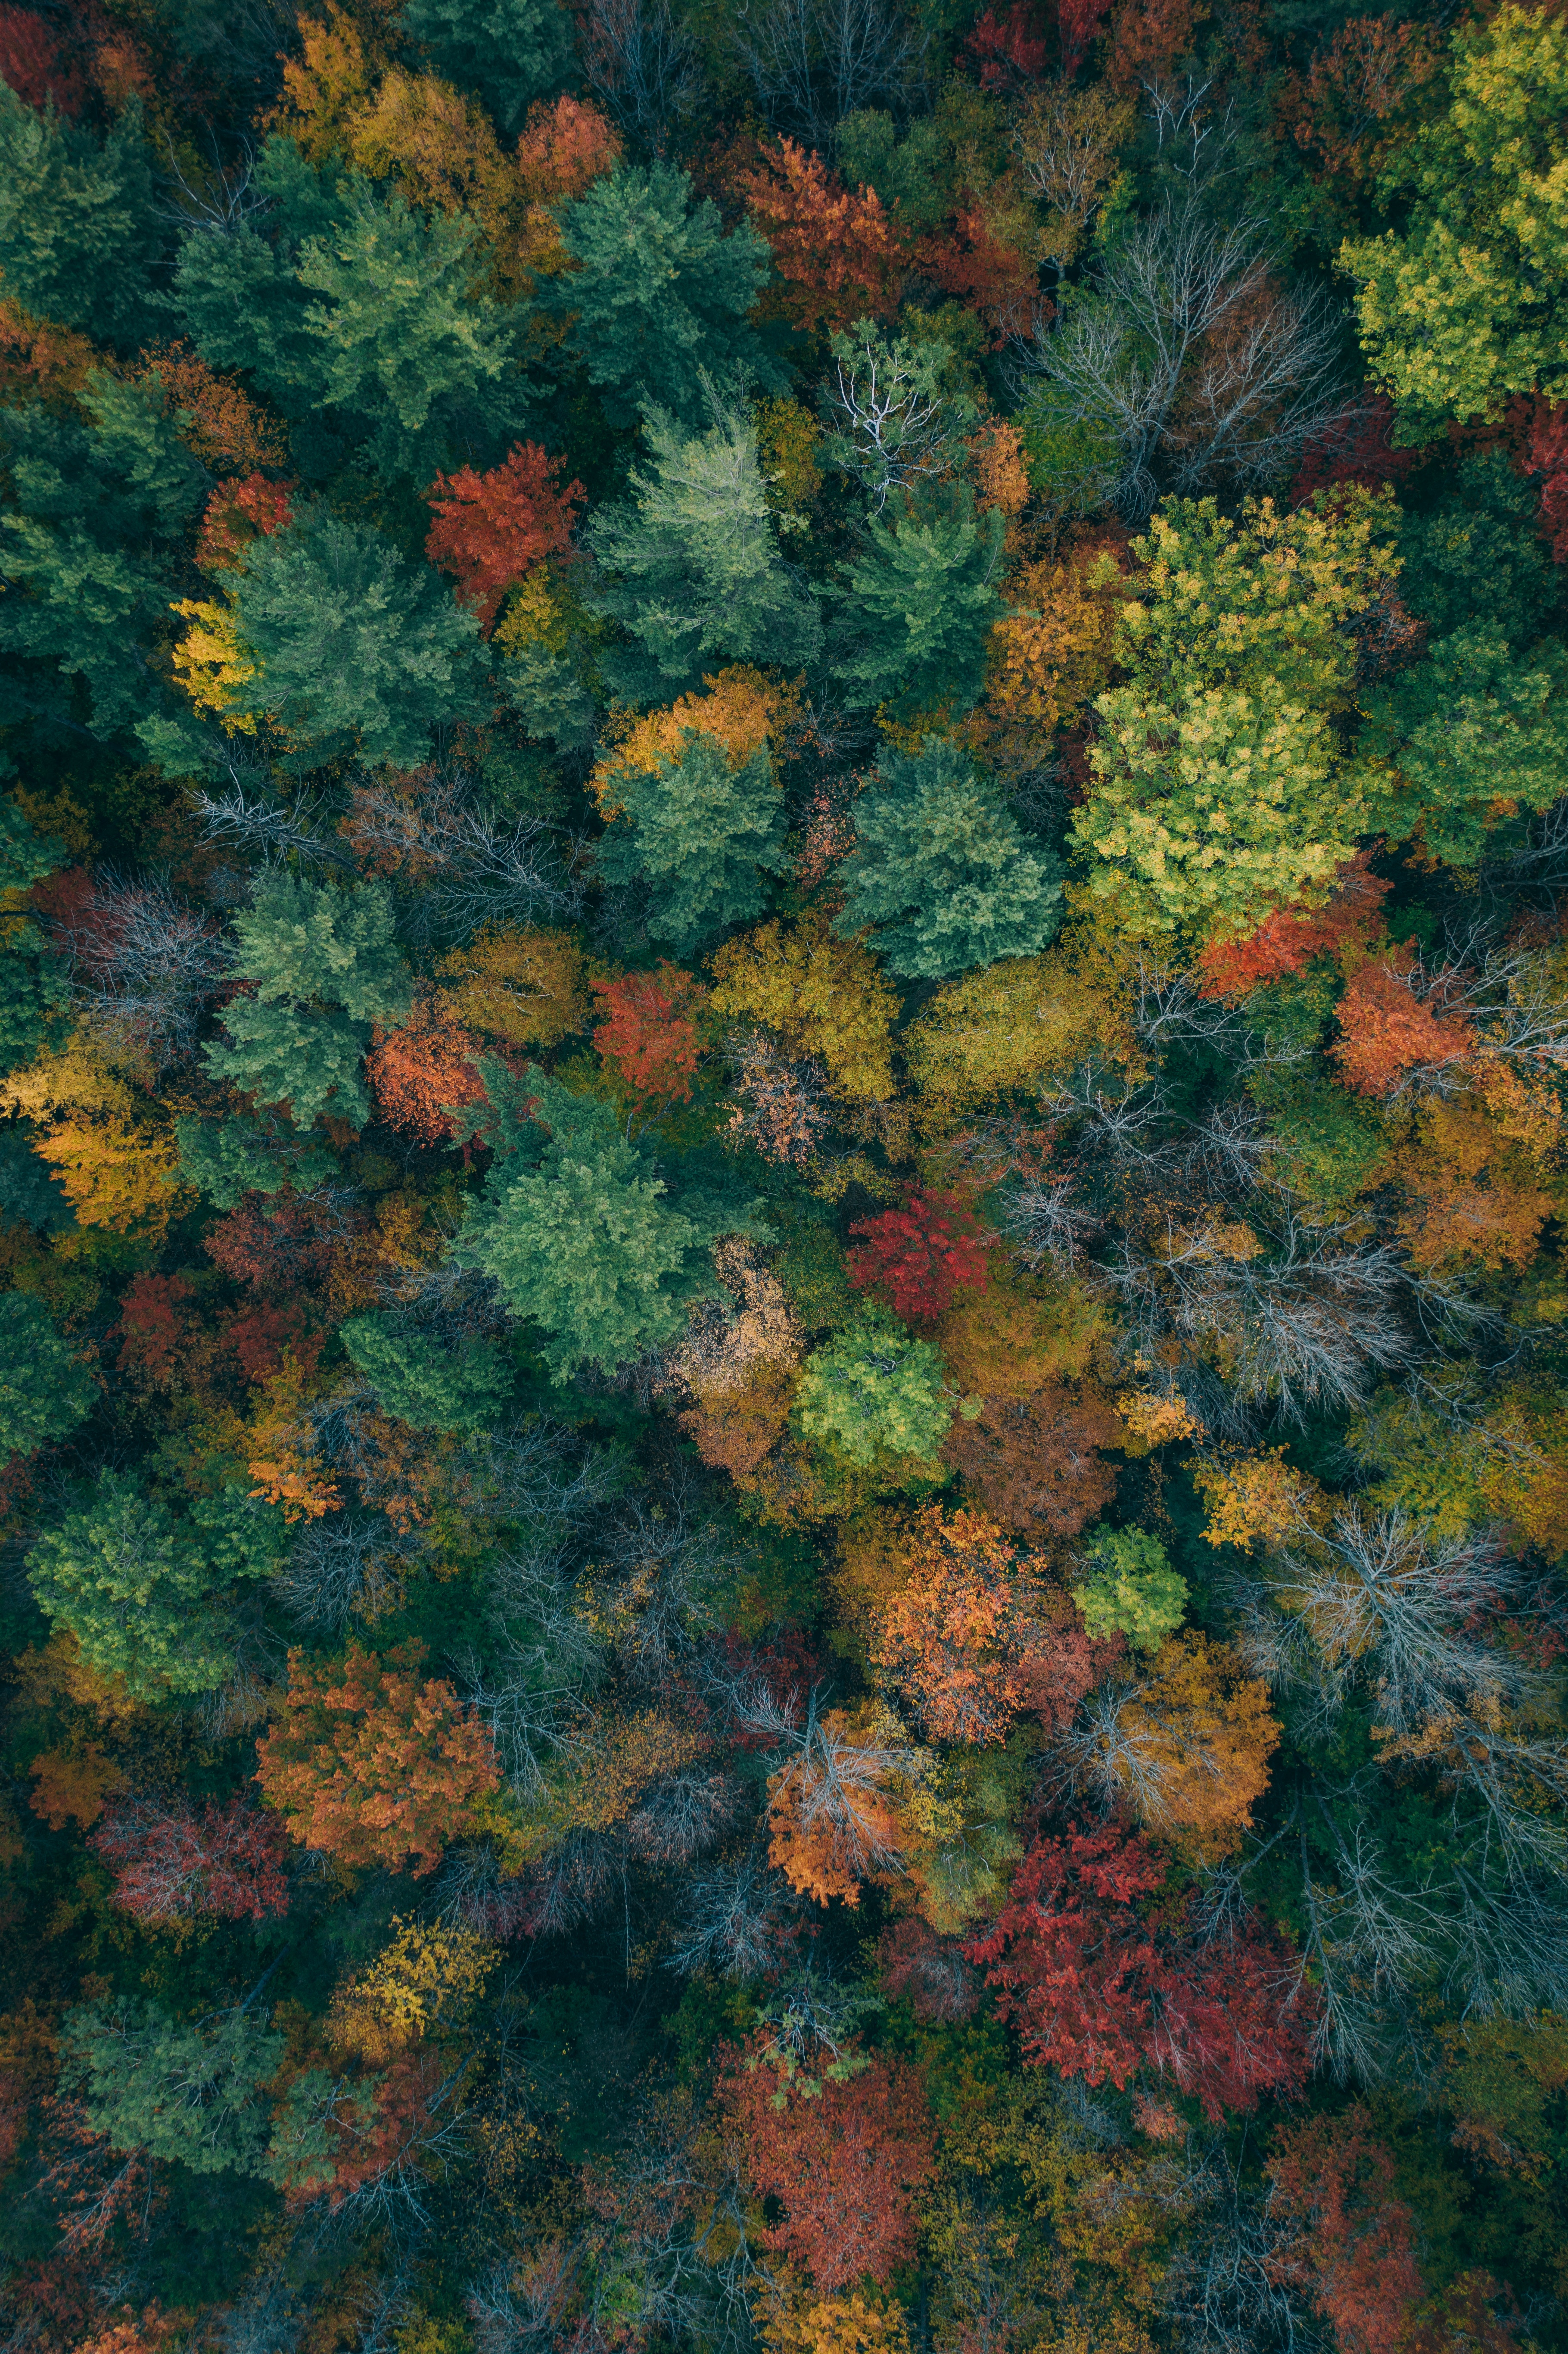 forest, colorful, nature, autumn colors, colourful, autumn paints, autumn, trees, view from above